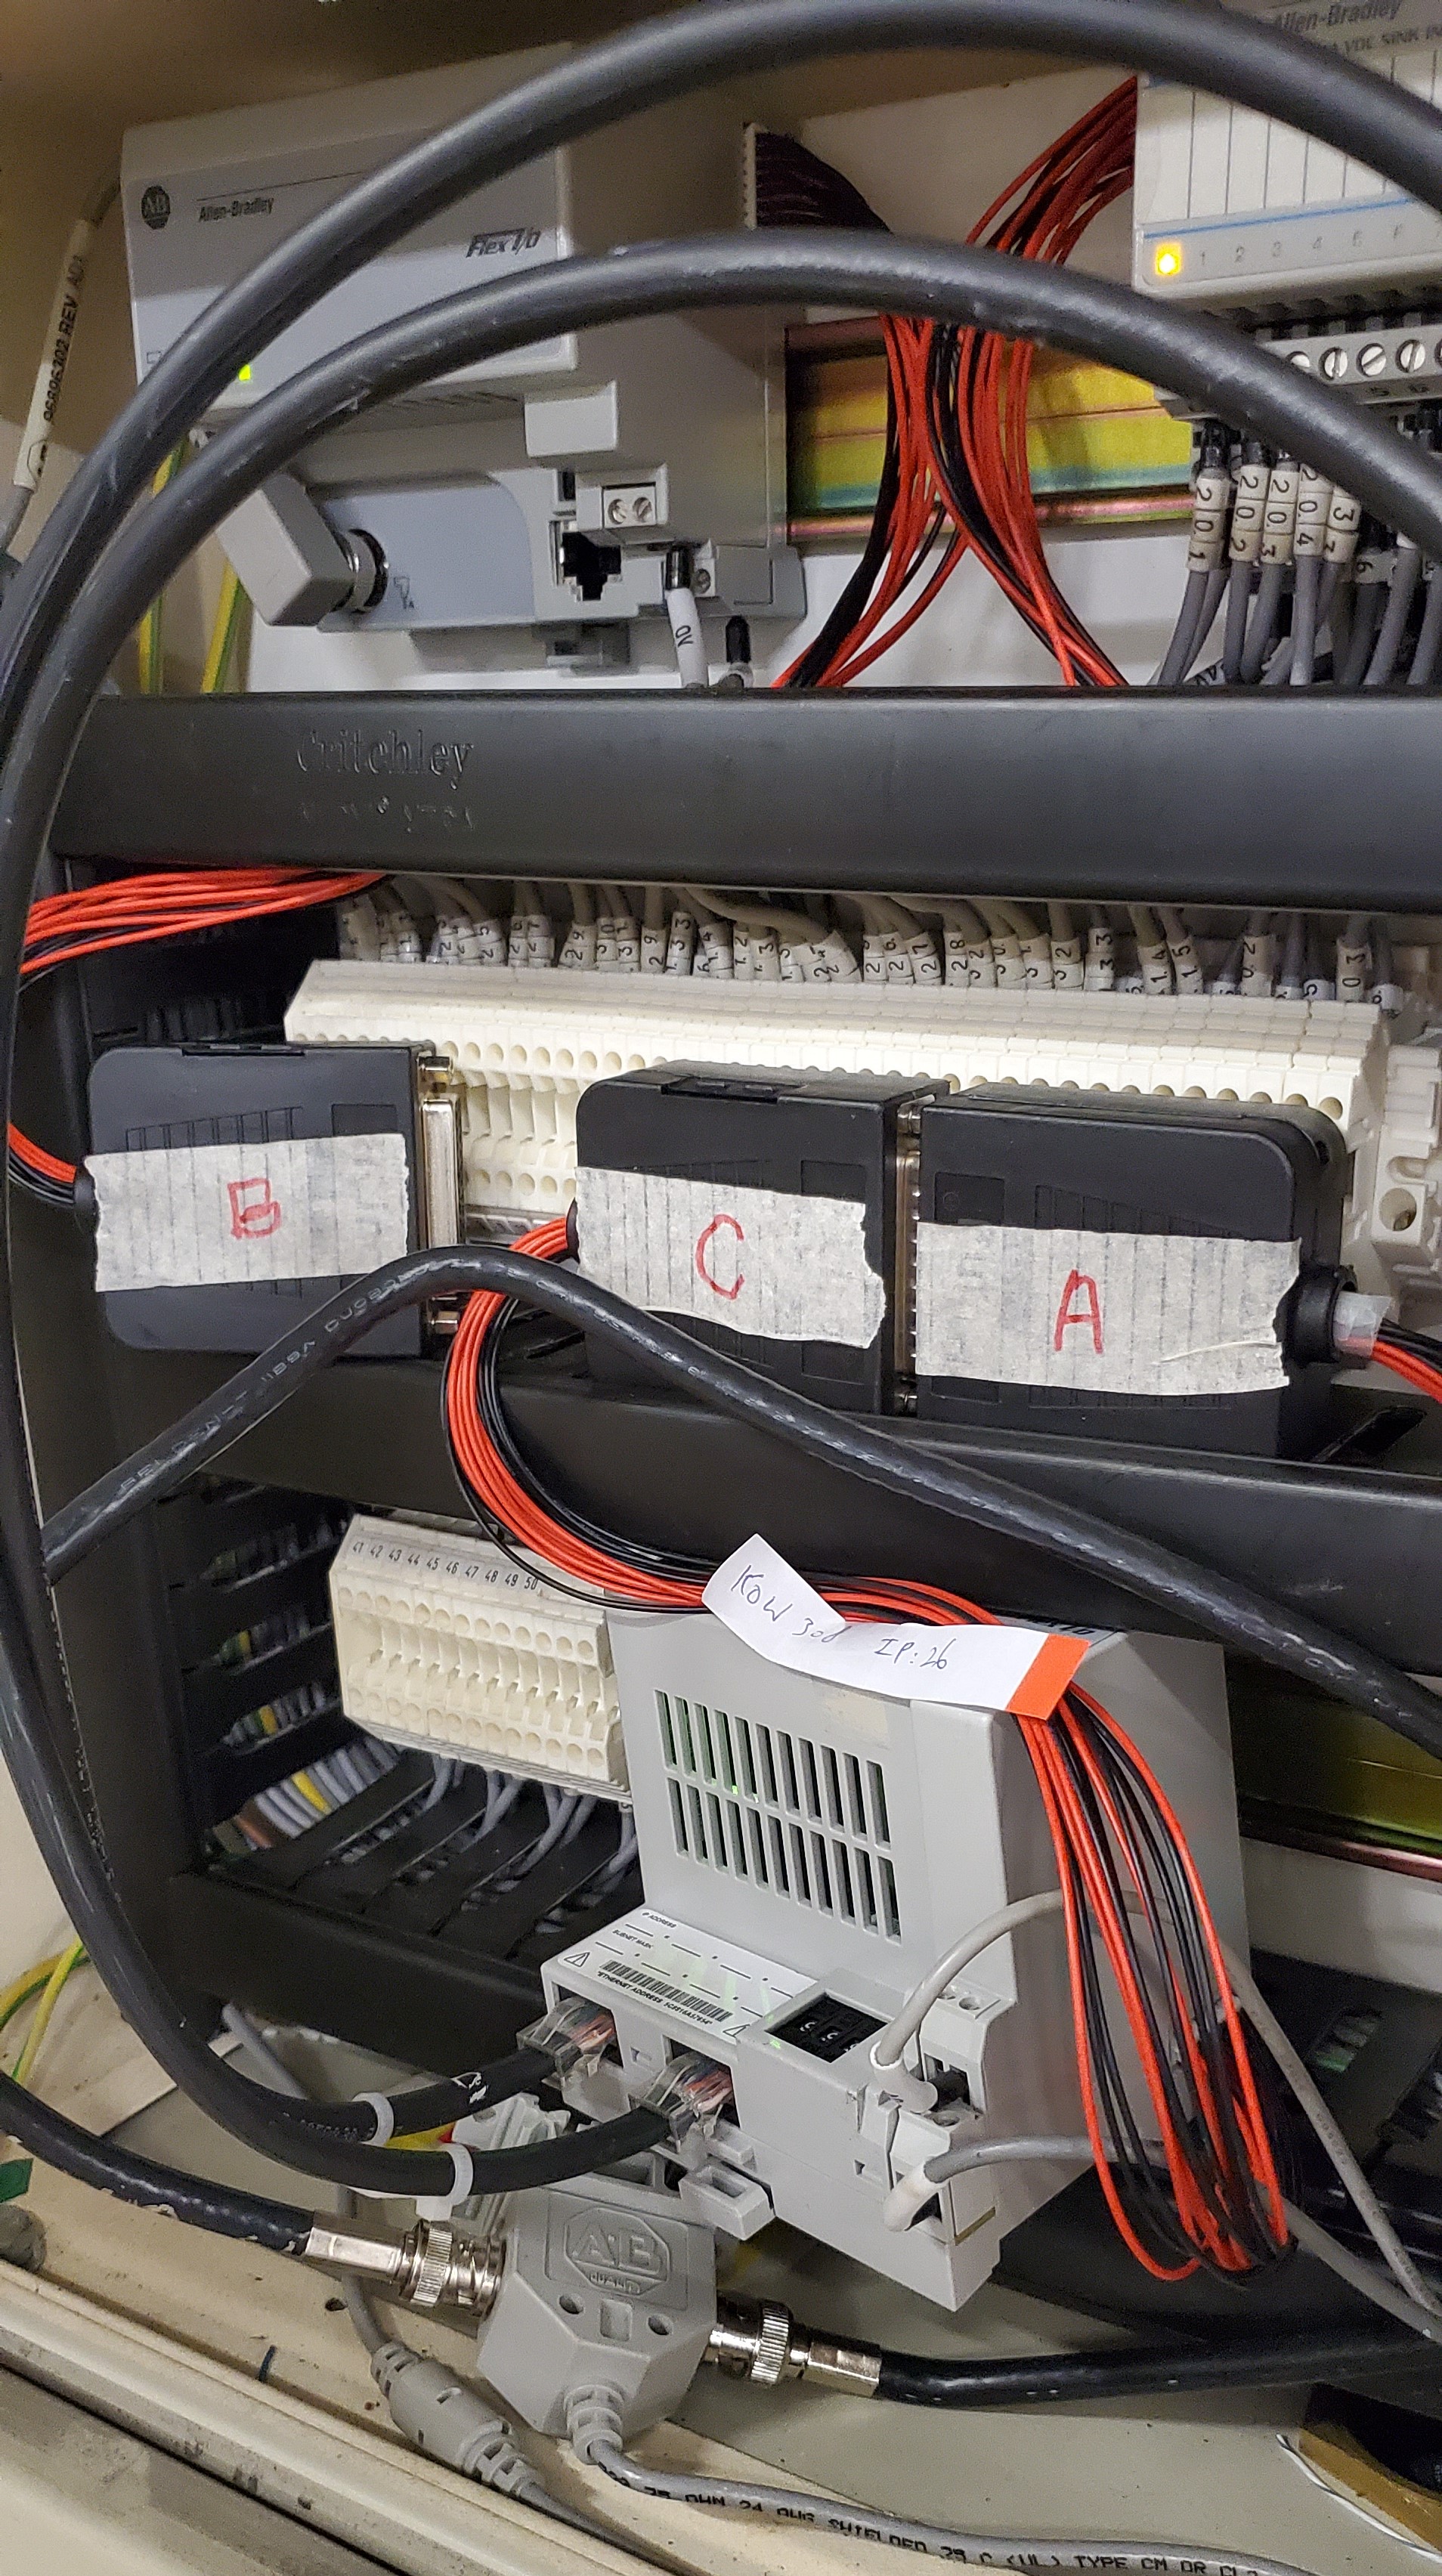 New Flex I/O Ethernet Adapter in Conveyor Control Panel During Testing & Commissioning (Typical)